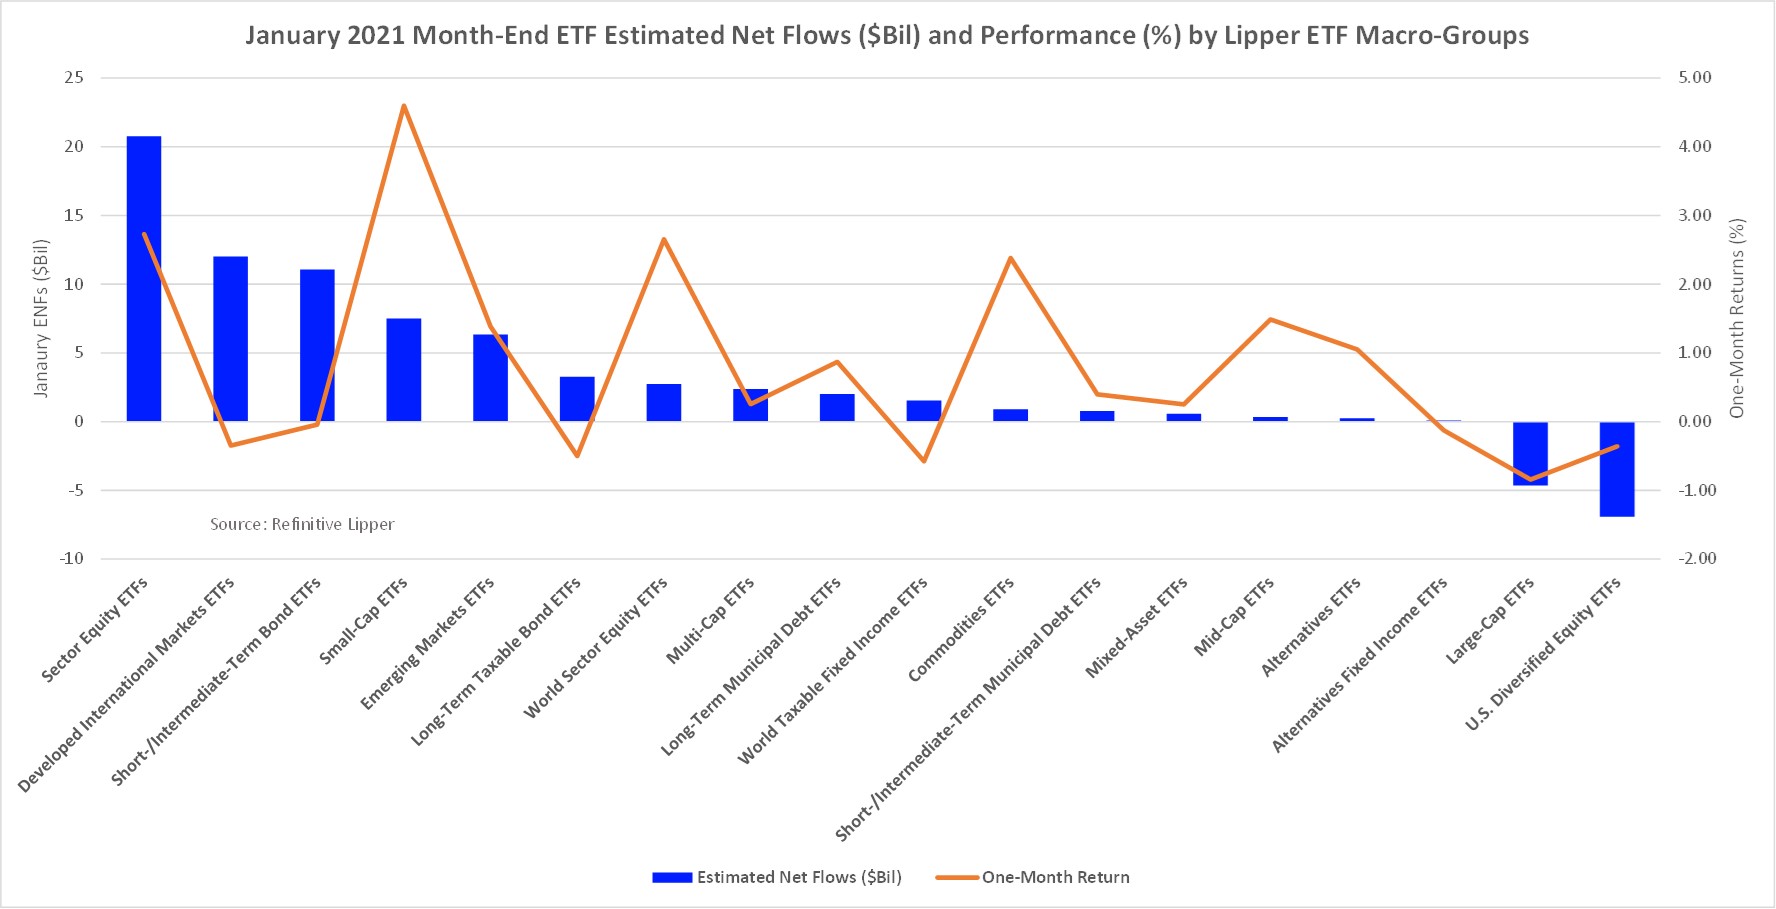 January 2021 ETF-ENFs And Returns By Macro Group